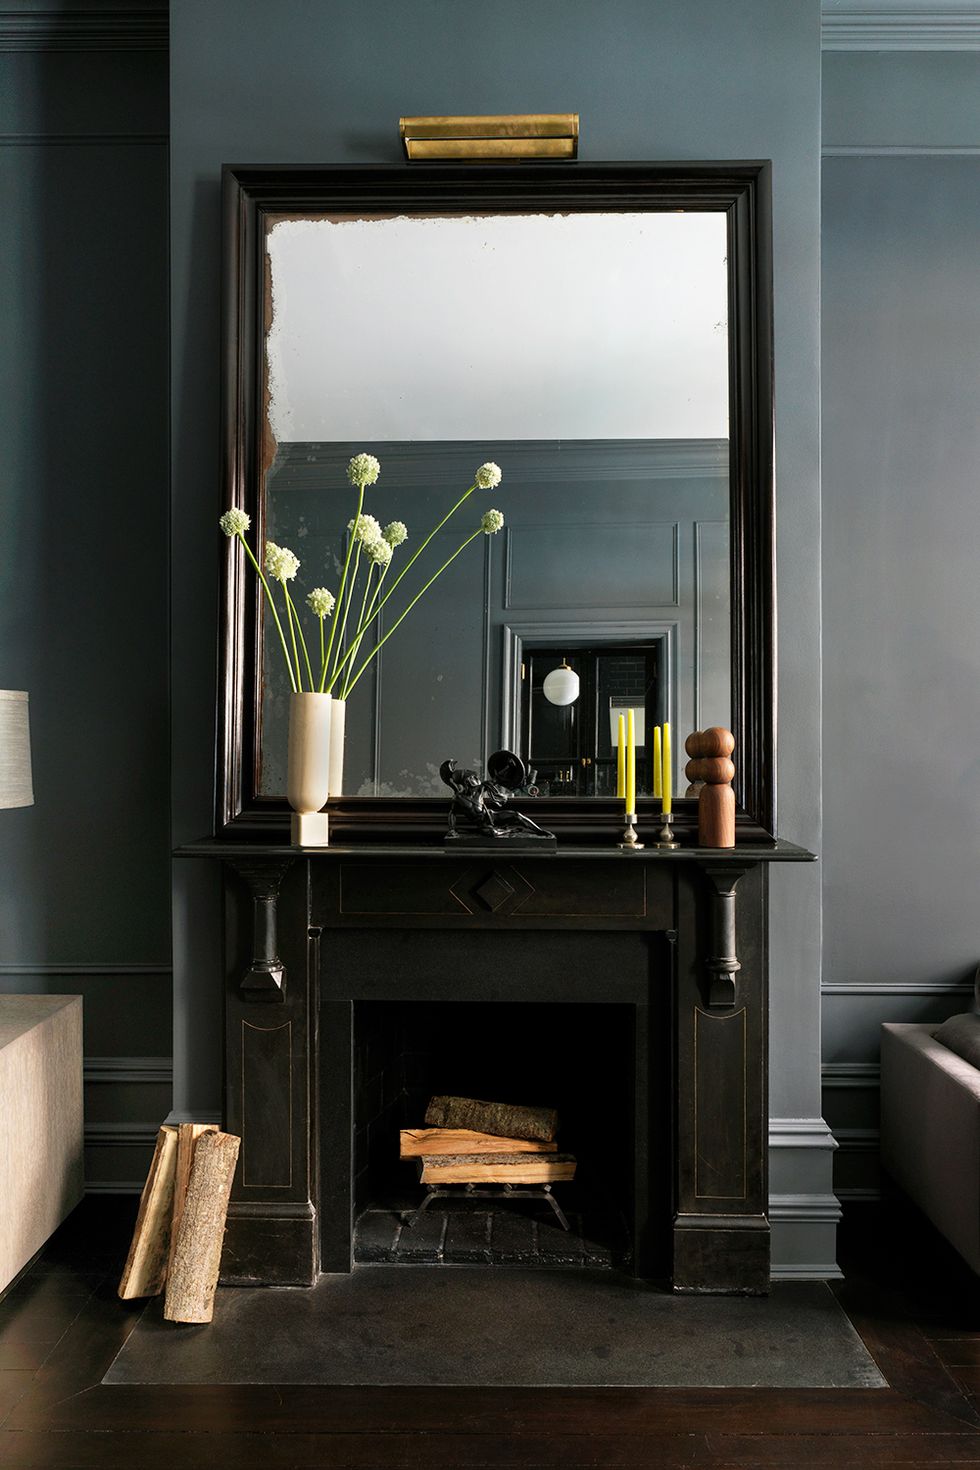 10 Stunning Ideas For Built Ins Around a Fireplace - Jenna Kate at